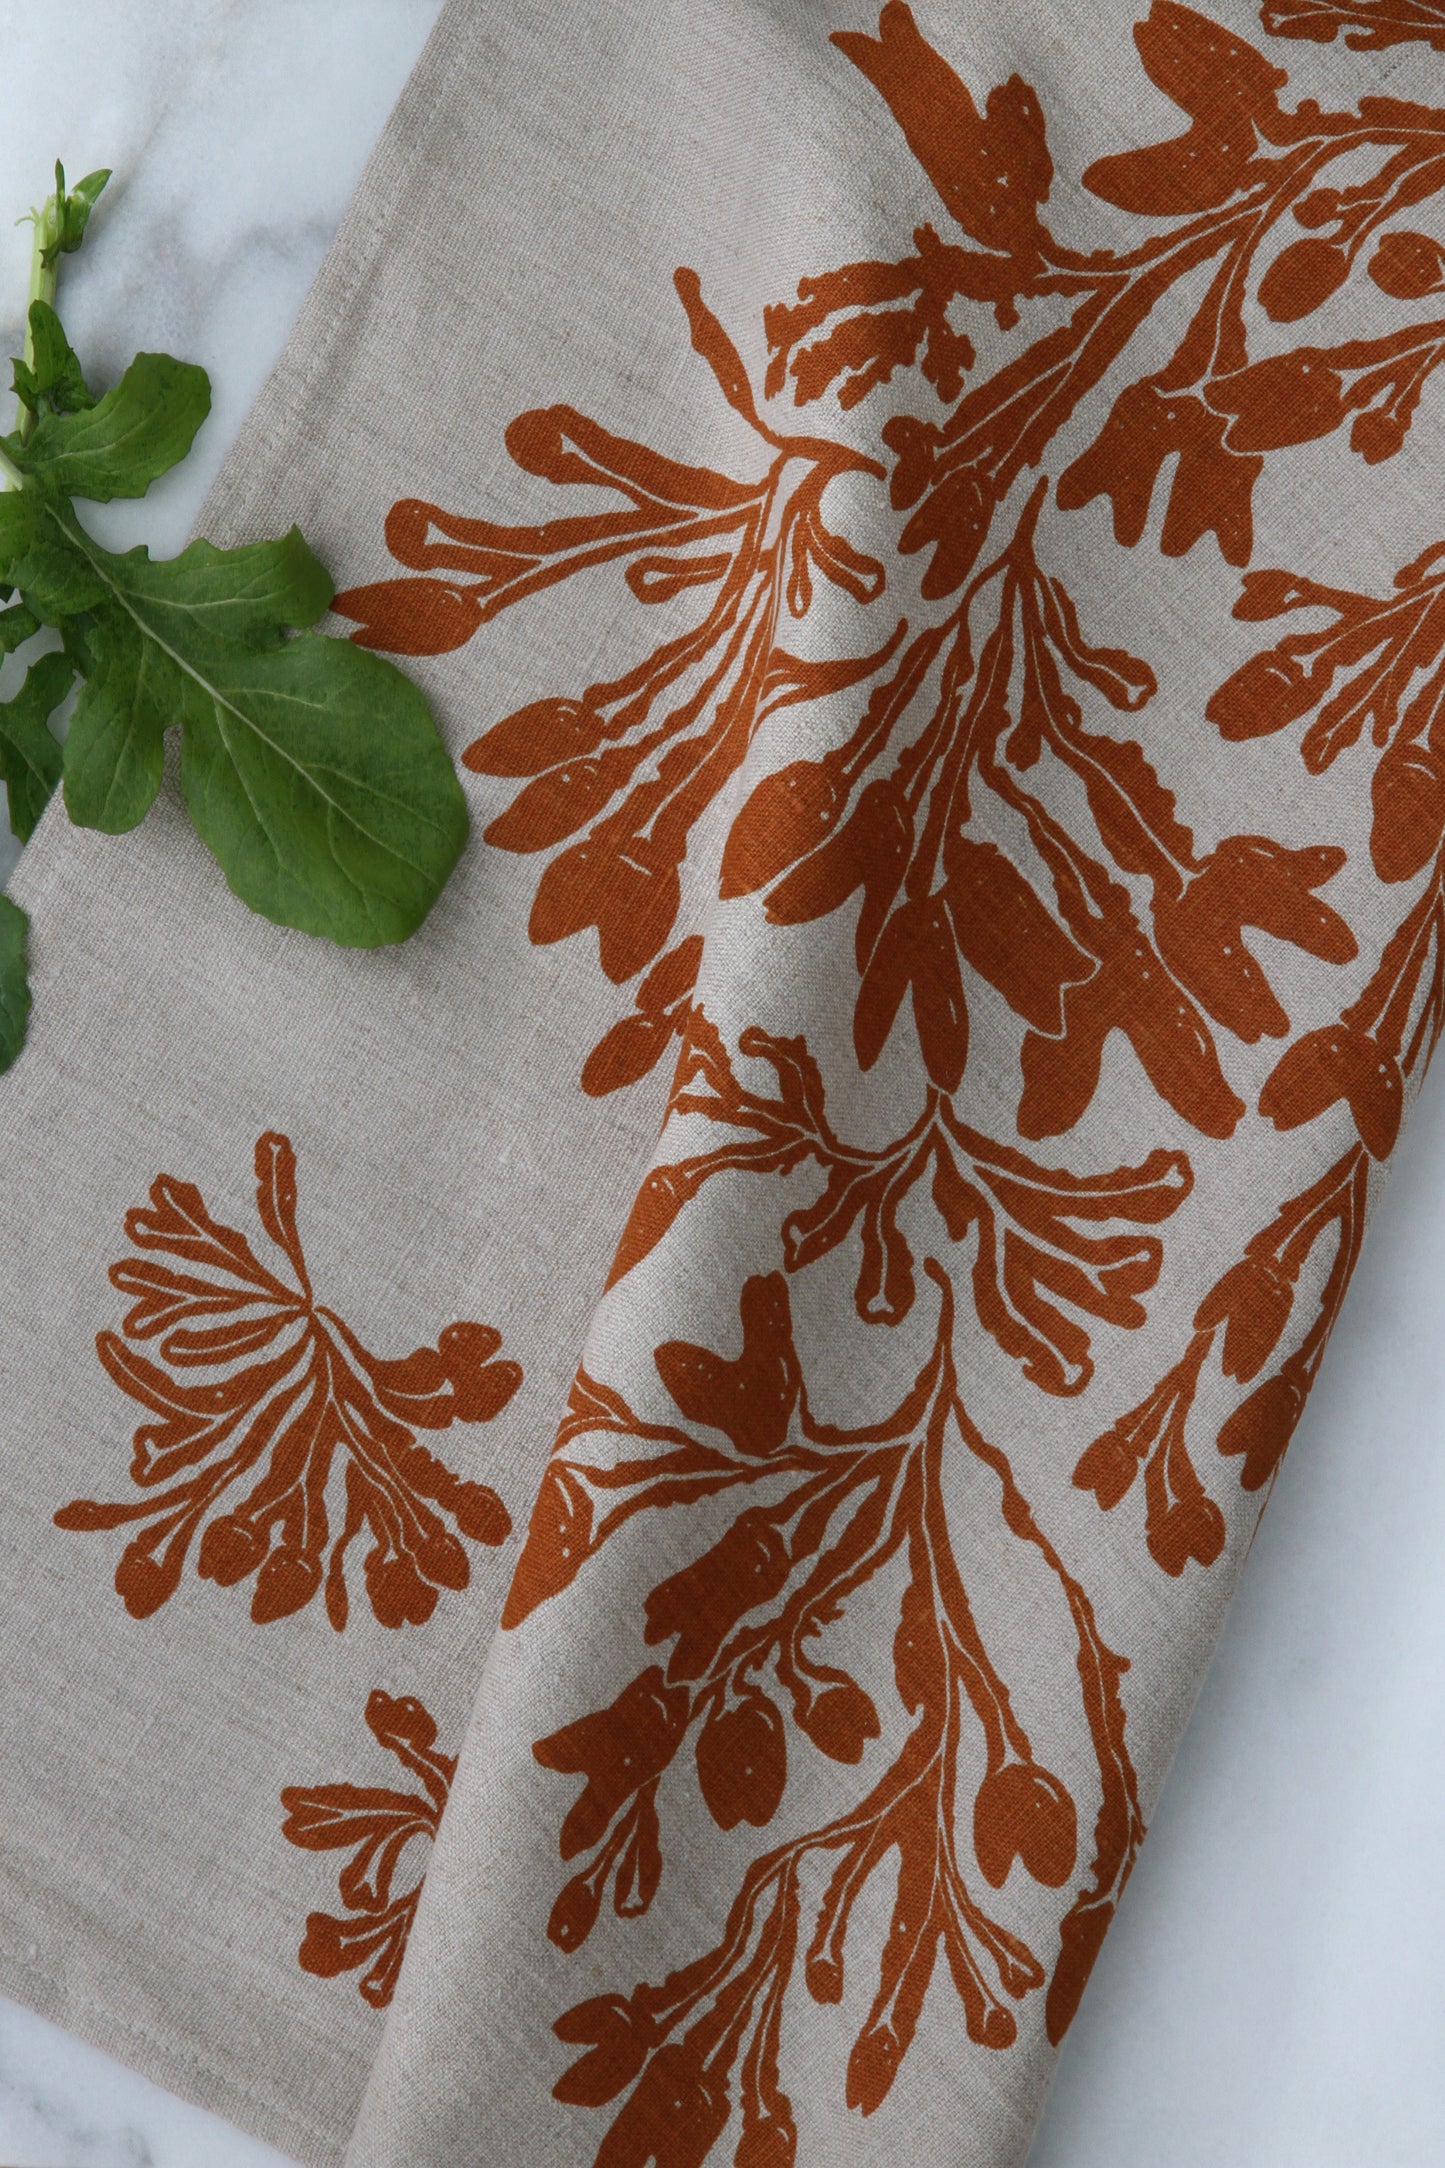 Seaweed Kitchen Towel in Ochre on Natural Linen